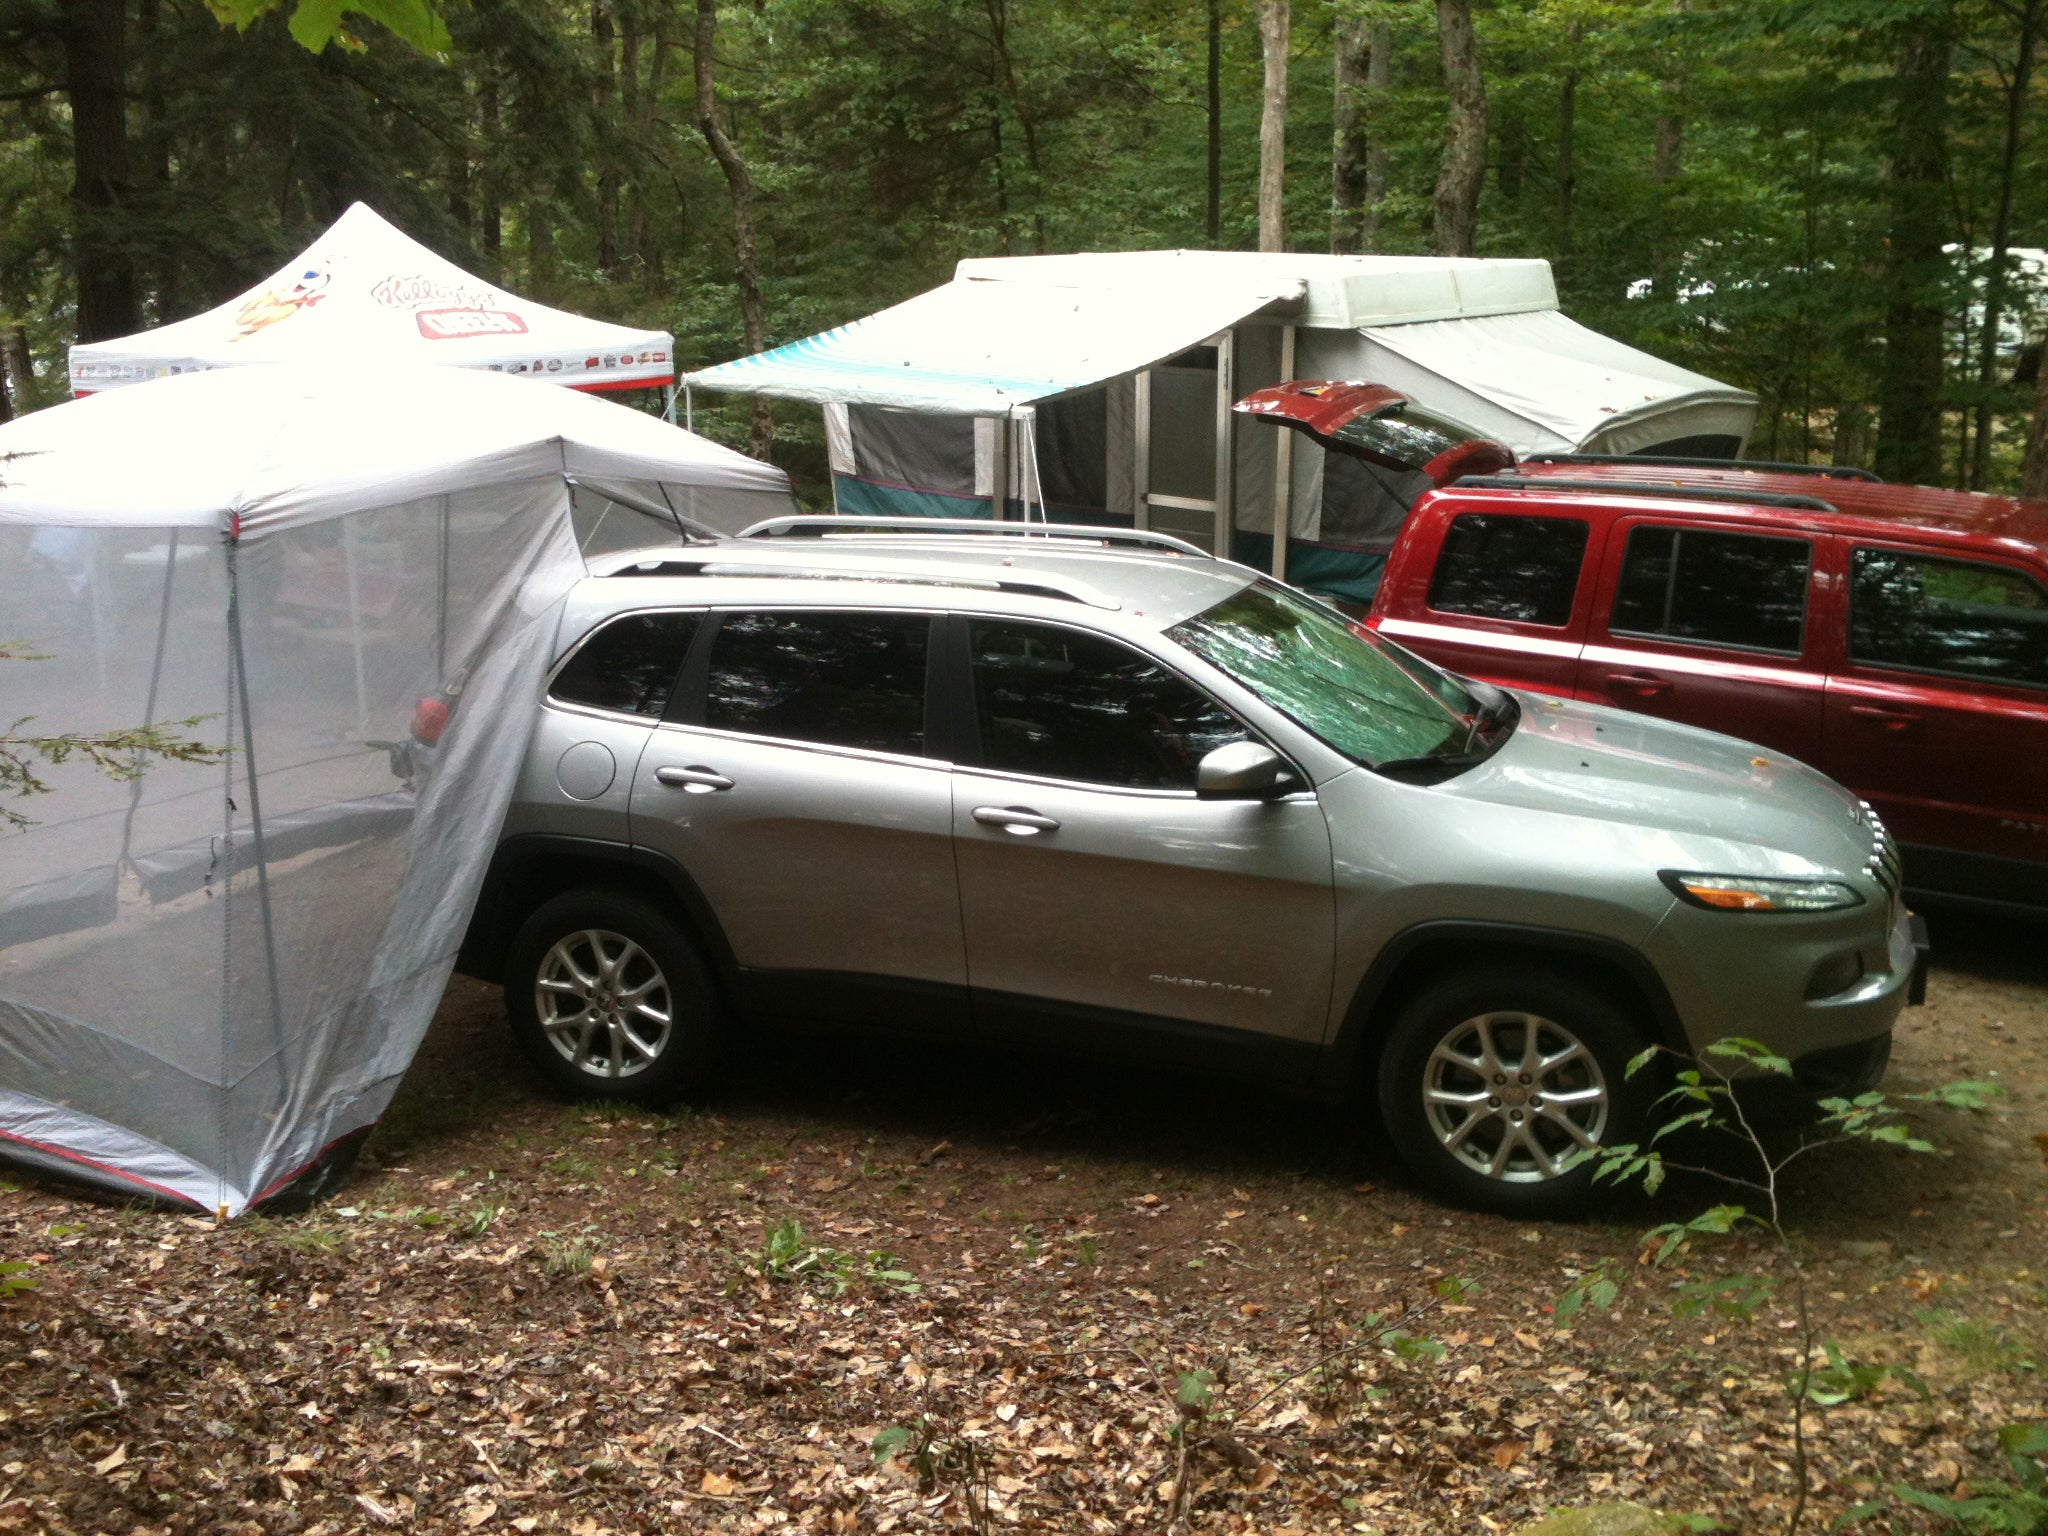 Camper submitted image from Nicks Lake Adirondack Preserve - 5